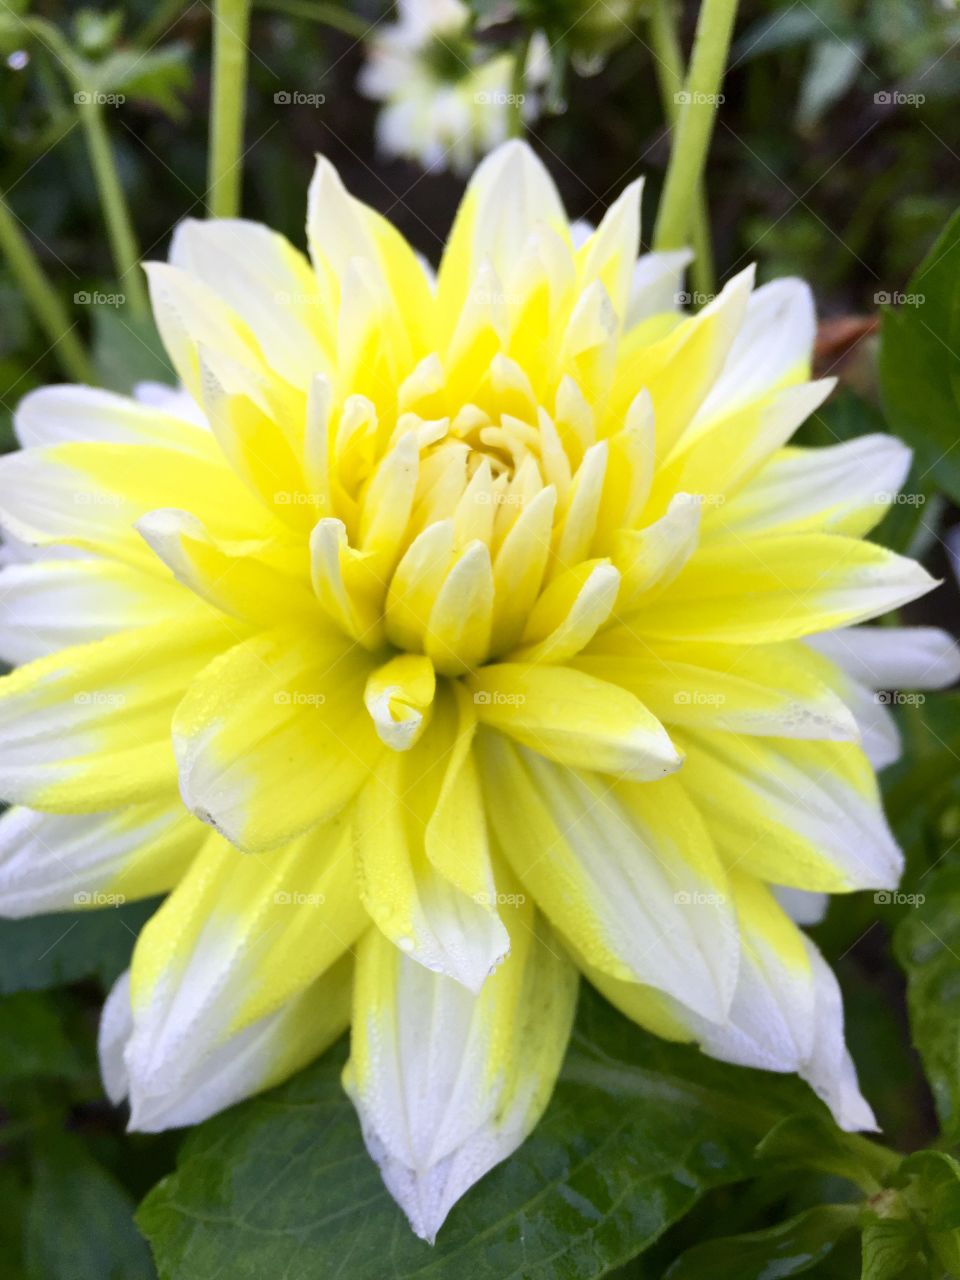 Dahlia flower blooming at outdoors